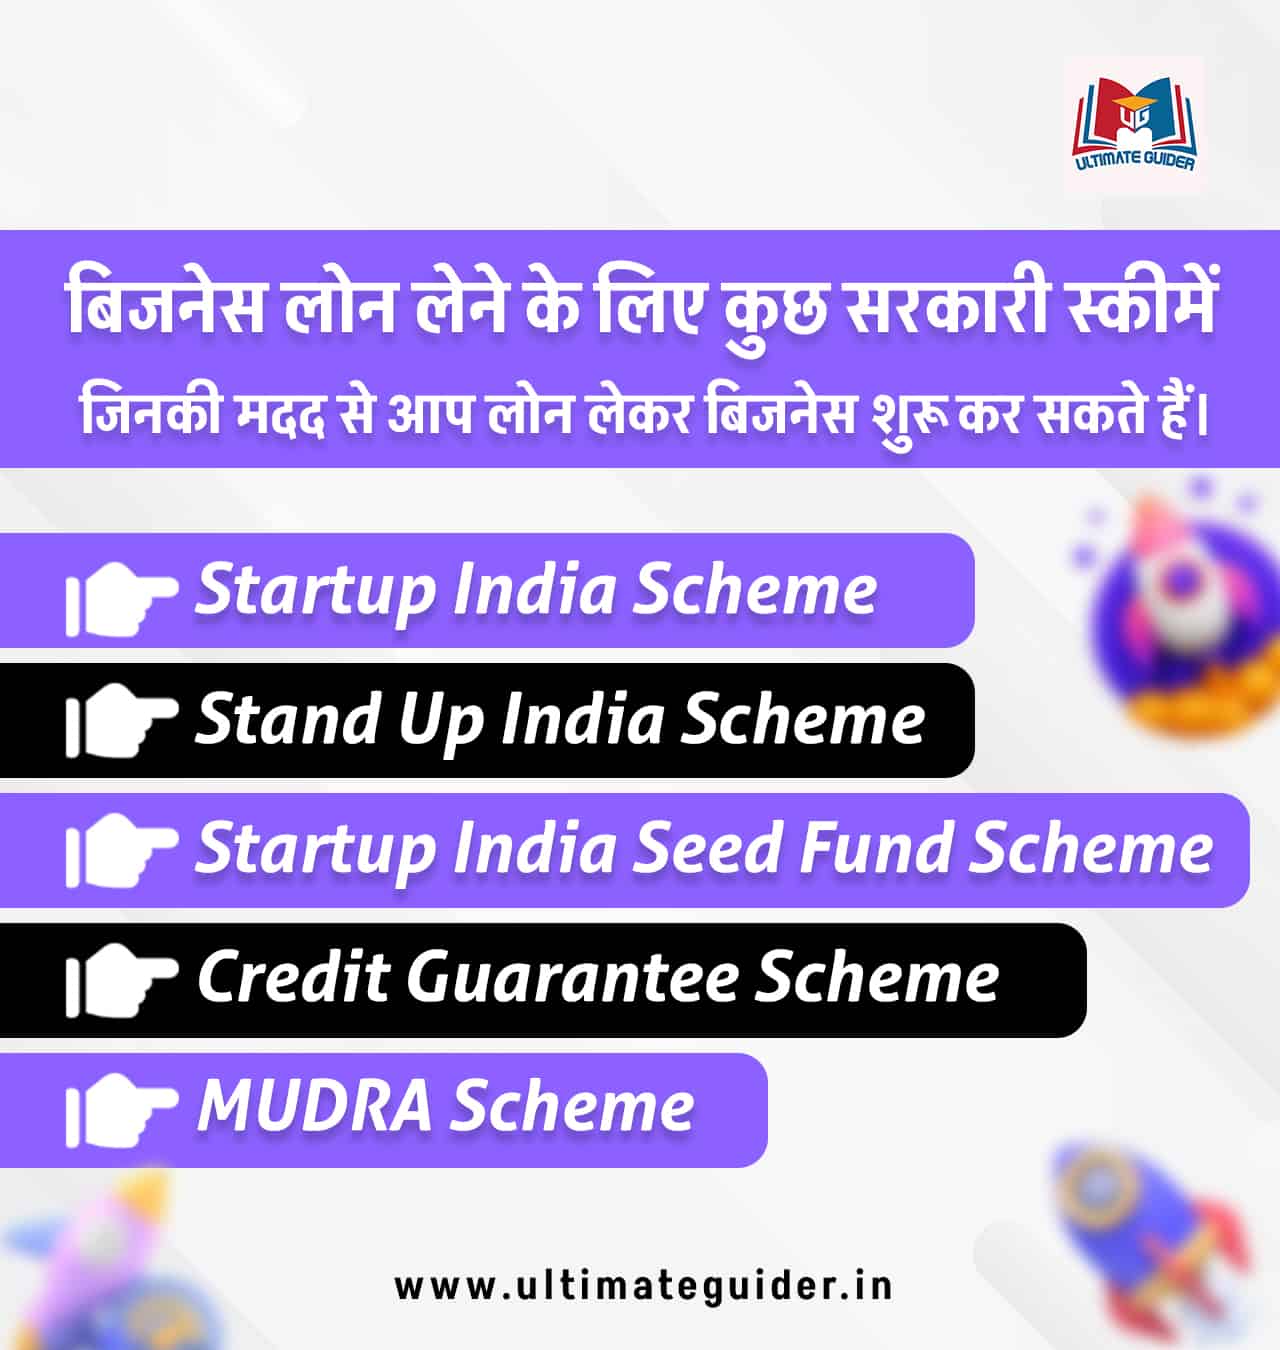 government business schemes in hindi  by by ultimateguider